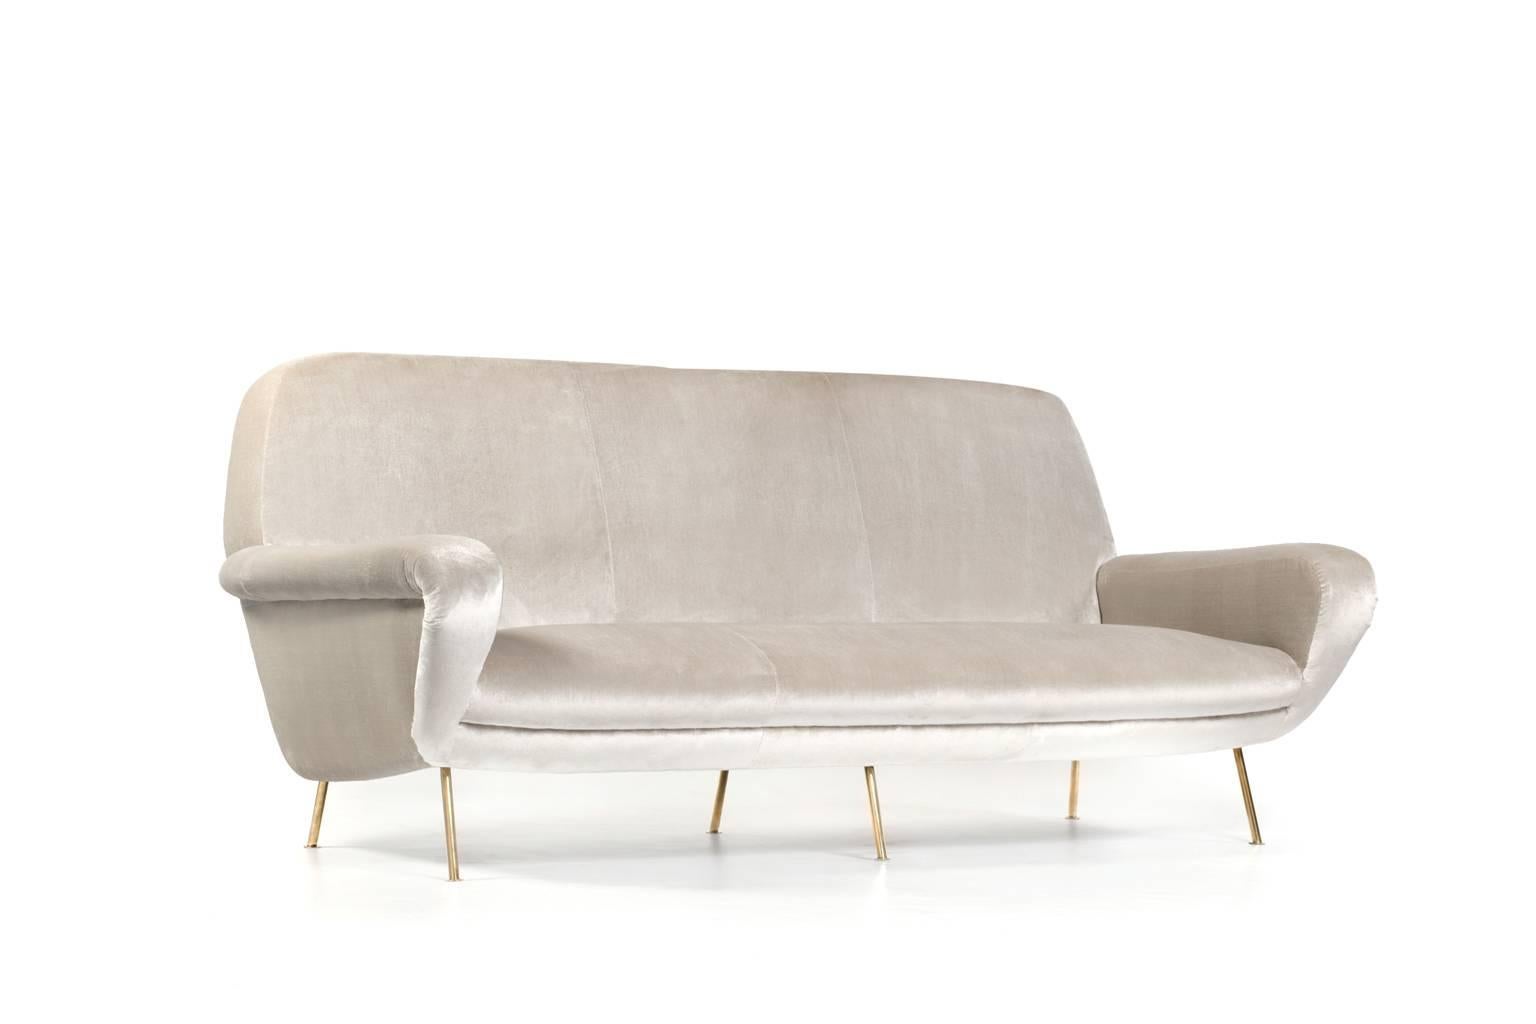 Exclusive sofa model ‘830’ by Gianfranco Frattini for Cassina, Italy, 1954. Beautiful elegant design on chic brass legs. Early 1950s edition reupholstered with a high quality Champagne colored velvet which provides a very chic and soft feeling.